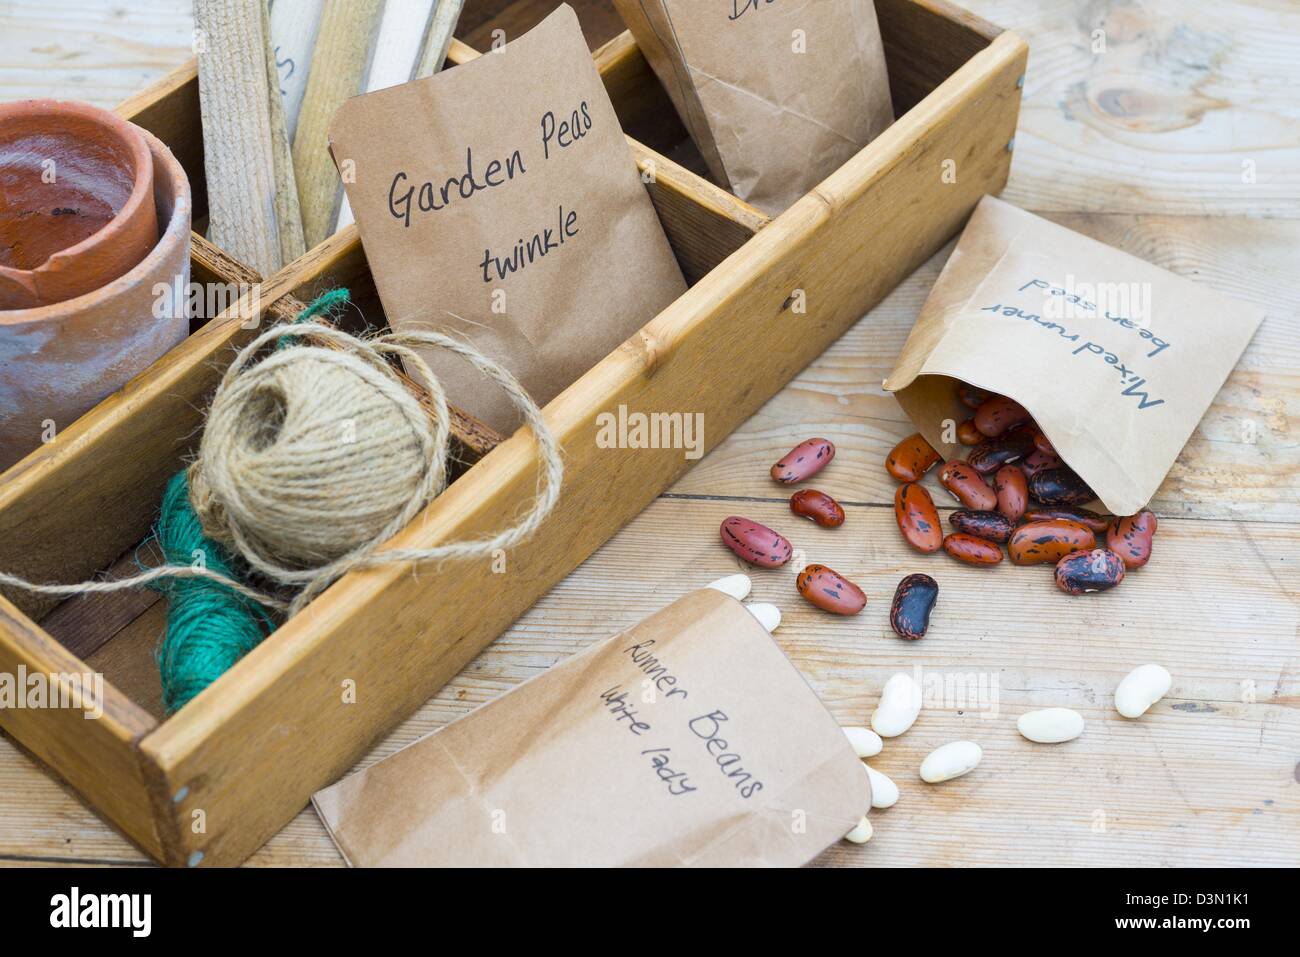 Potting bench springtime still life with saved seeds in homemade packets and gardening items Stock Photo